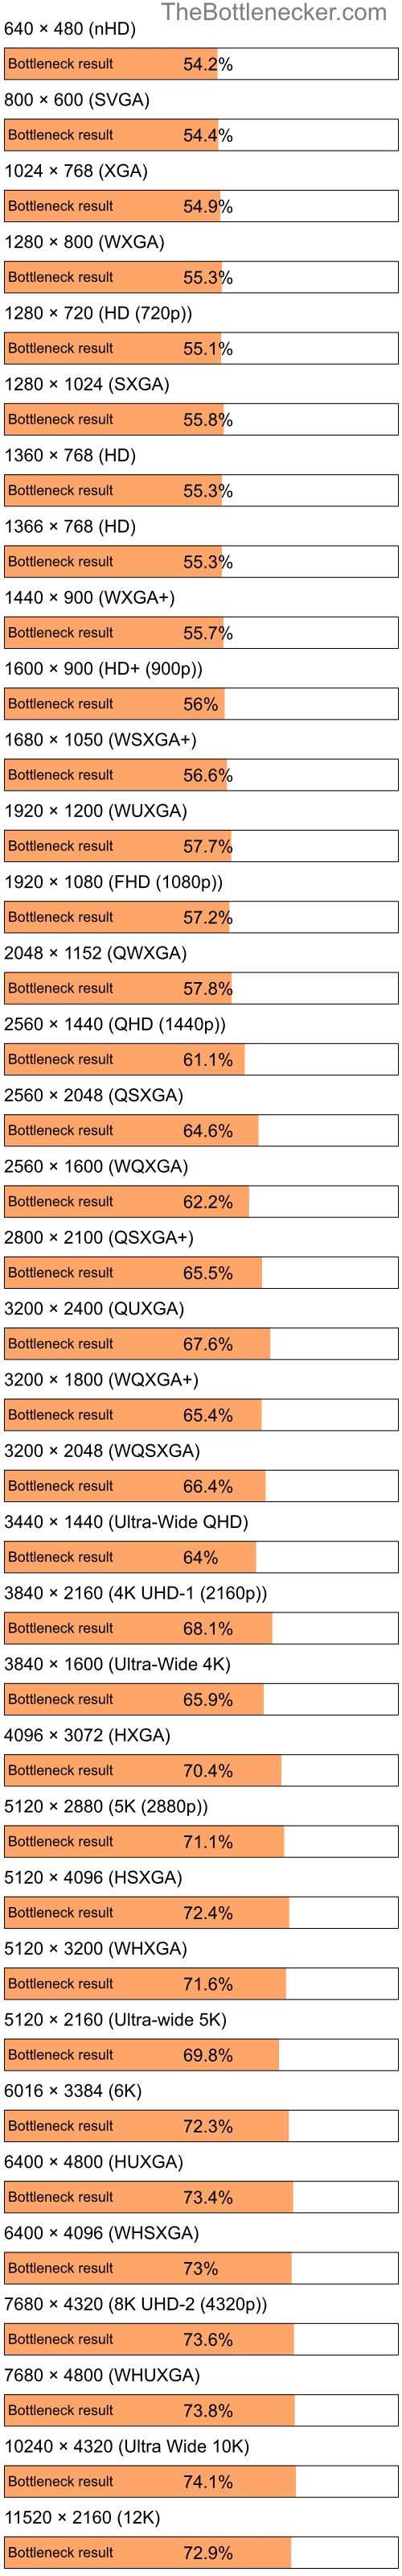 Bottleneck results by resolution for Intel Pentium 4 and NVIDIA GeForce 6700 XL in Processor Intense Tasks